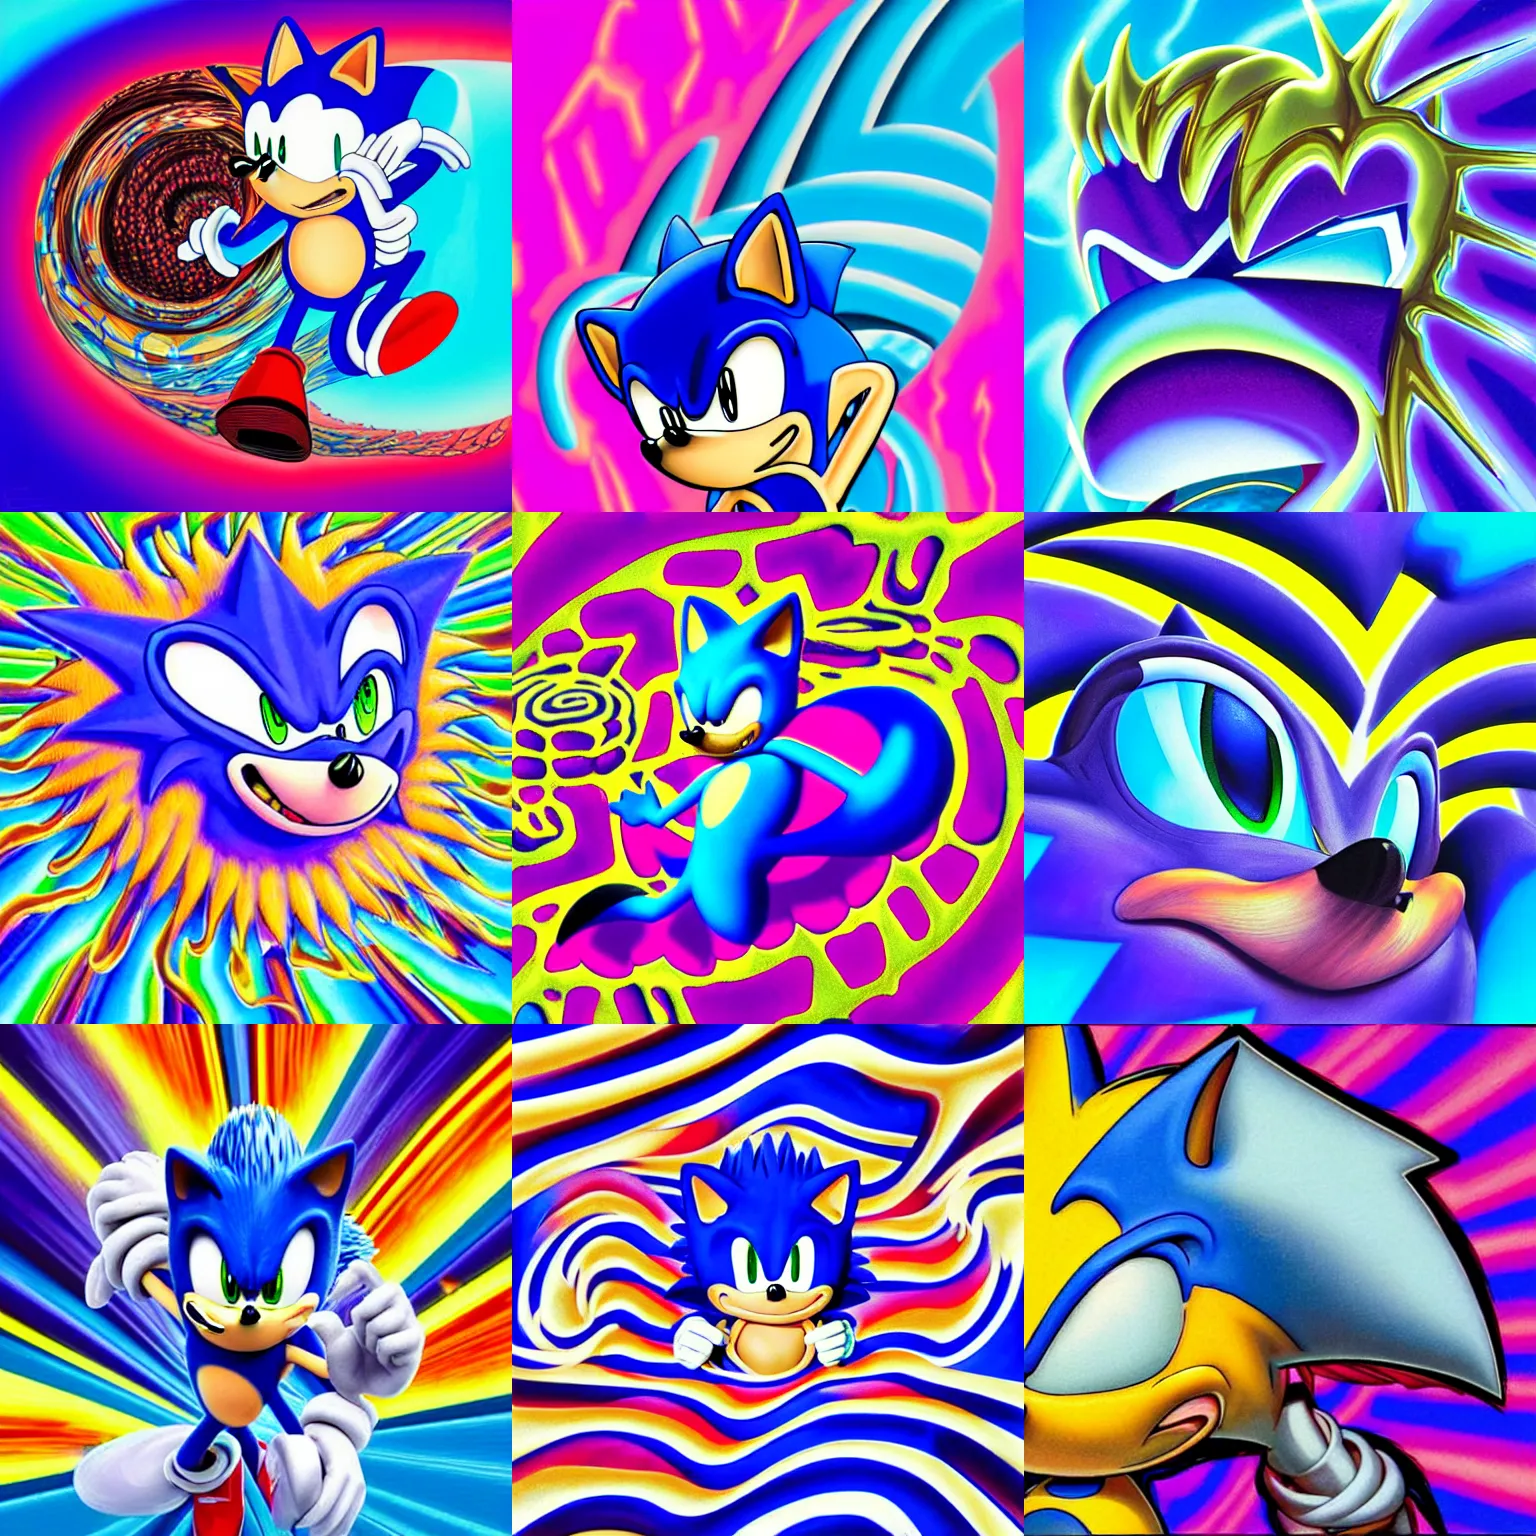 Prompt: surreal sonic hedgehog portrait, sharp, lowbrow, detailed professional, high quality airbrush art MGMT album cover of a liquid dissolving LSD DMT blue sonic the hedgehog surfing through cyberspace, purple checkerboard background, 1990s 1992 acid house techno Sega Genesis video game album cover